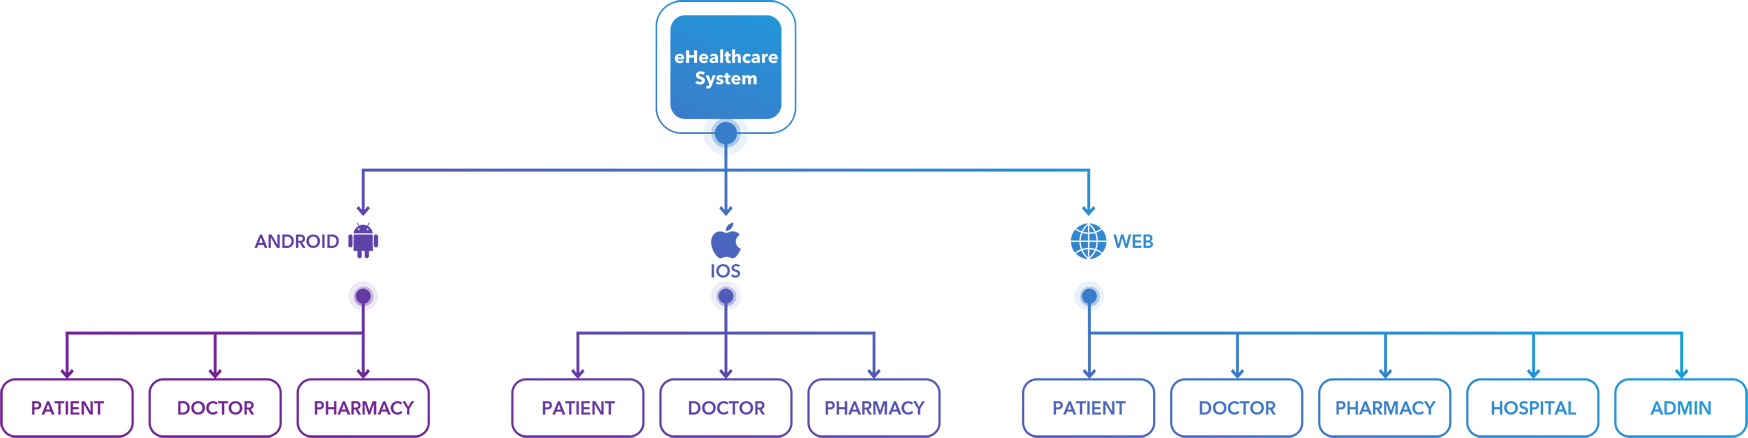 Ehealthcare System